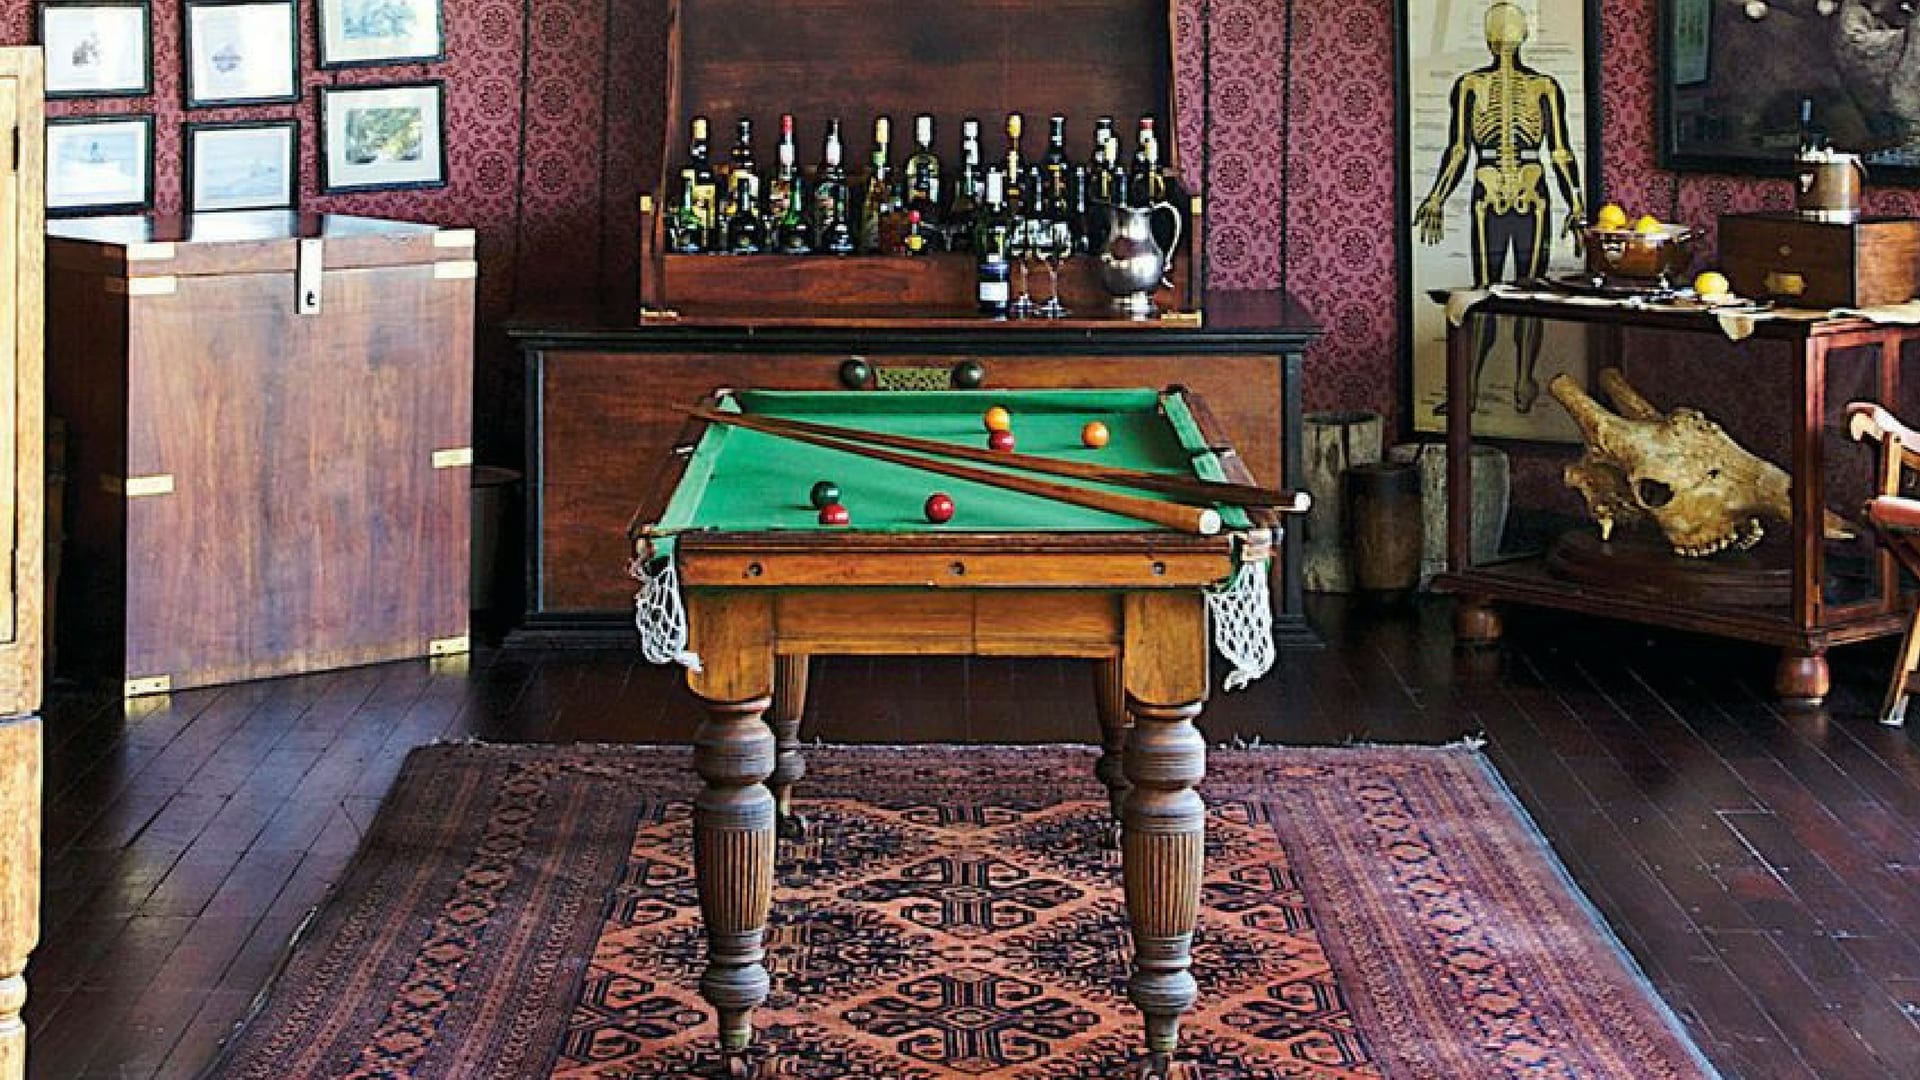 A pool table at Jack's camp